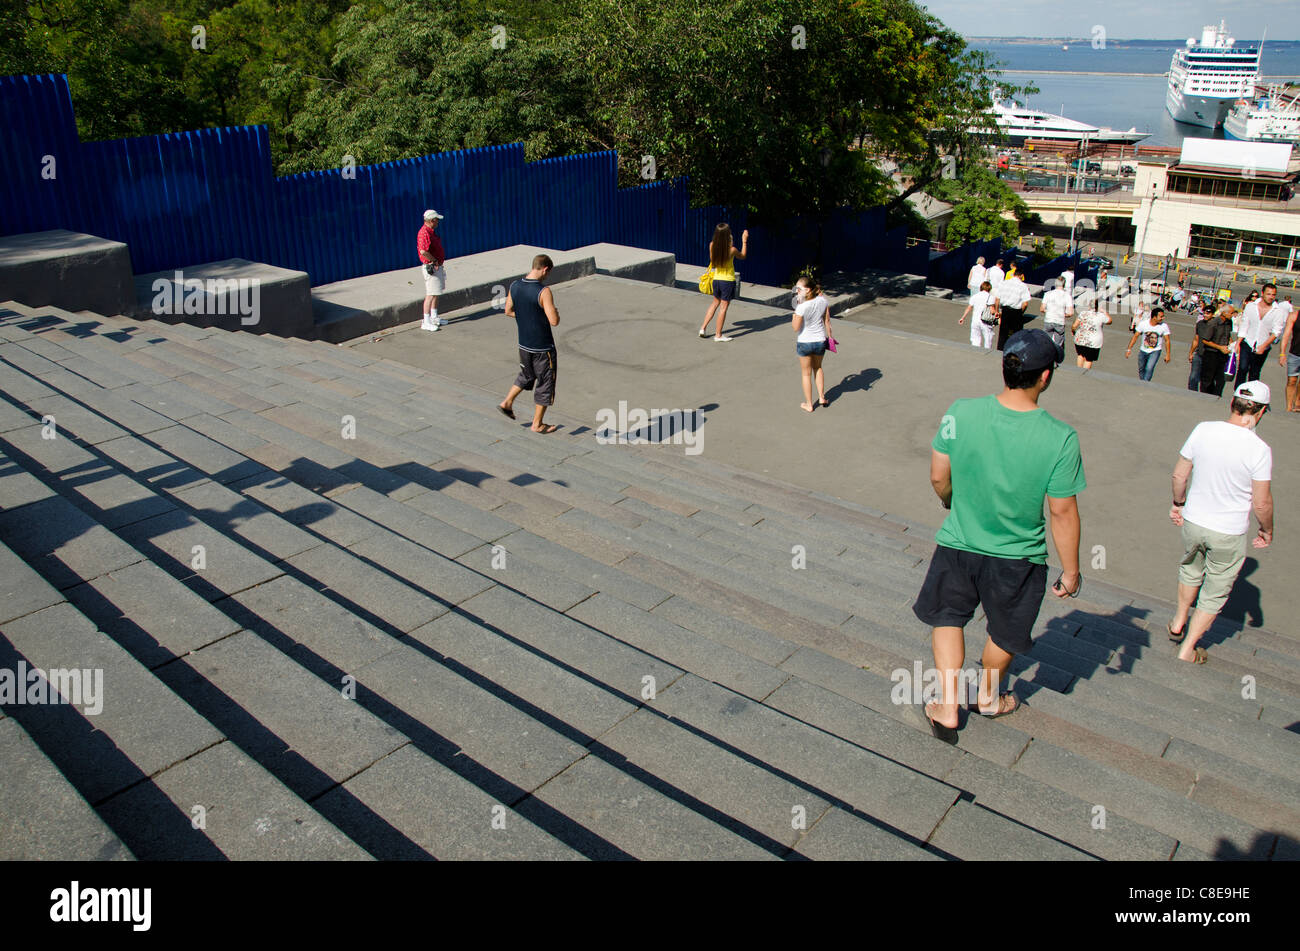 Ukraine, Odessa. Potemkin Steps, looking down the 192 steps from Primorsky Blvd. to the Black Sea cruise port terminal. Stock Photo